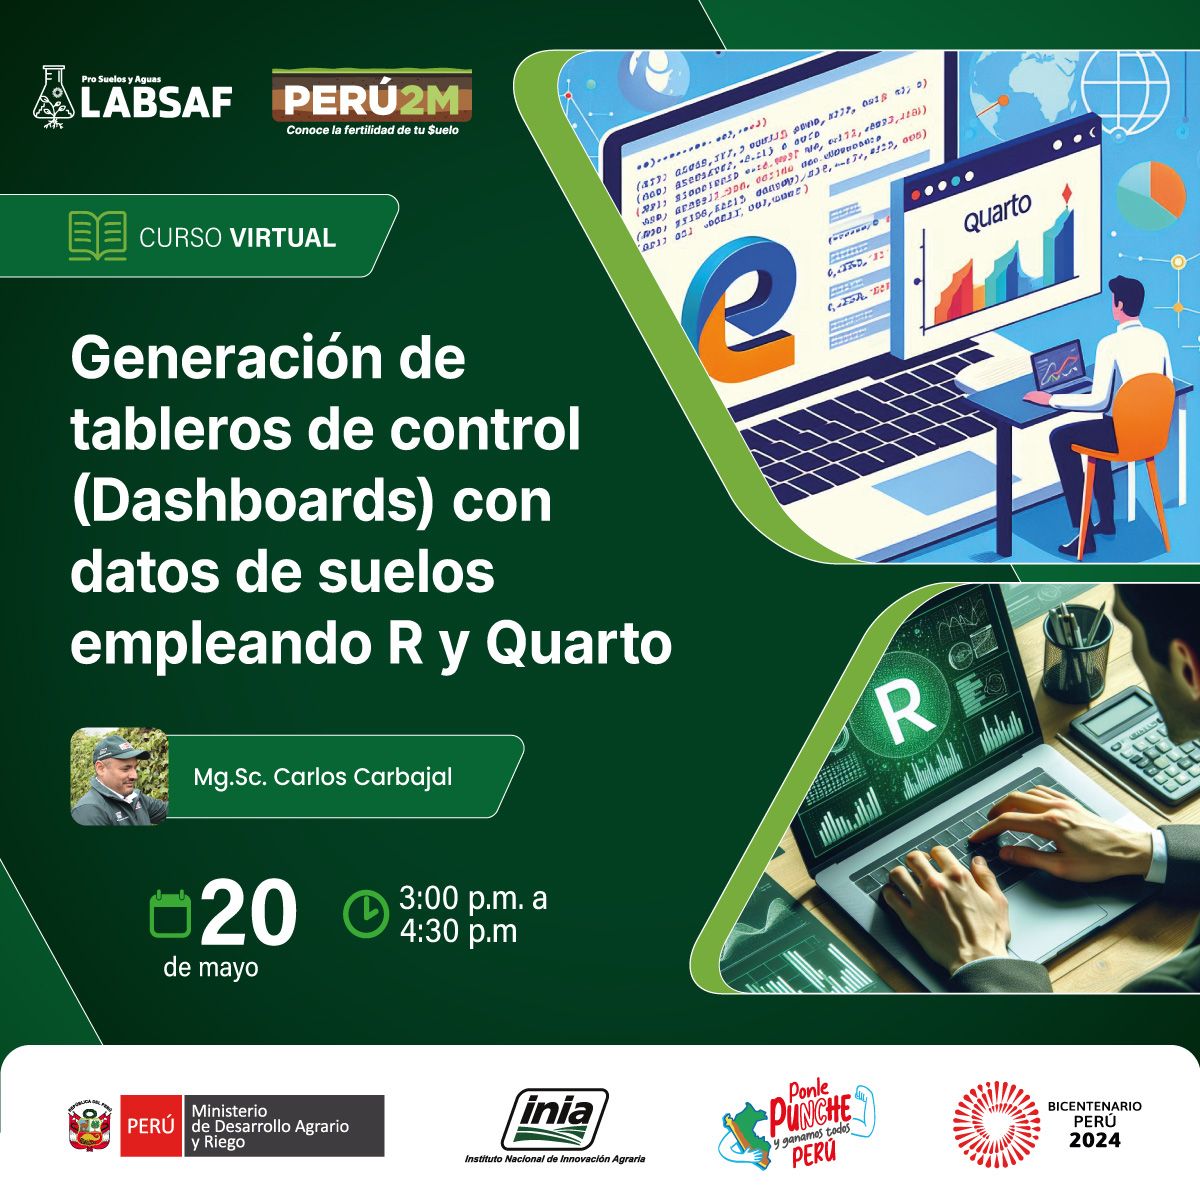 flyer_curso-dashboard_20-may-24.jpeg picture